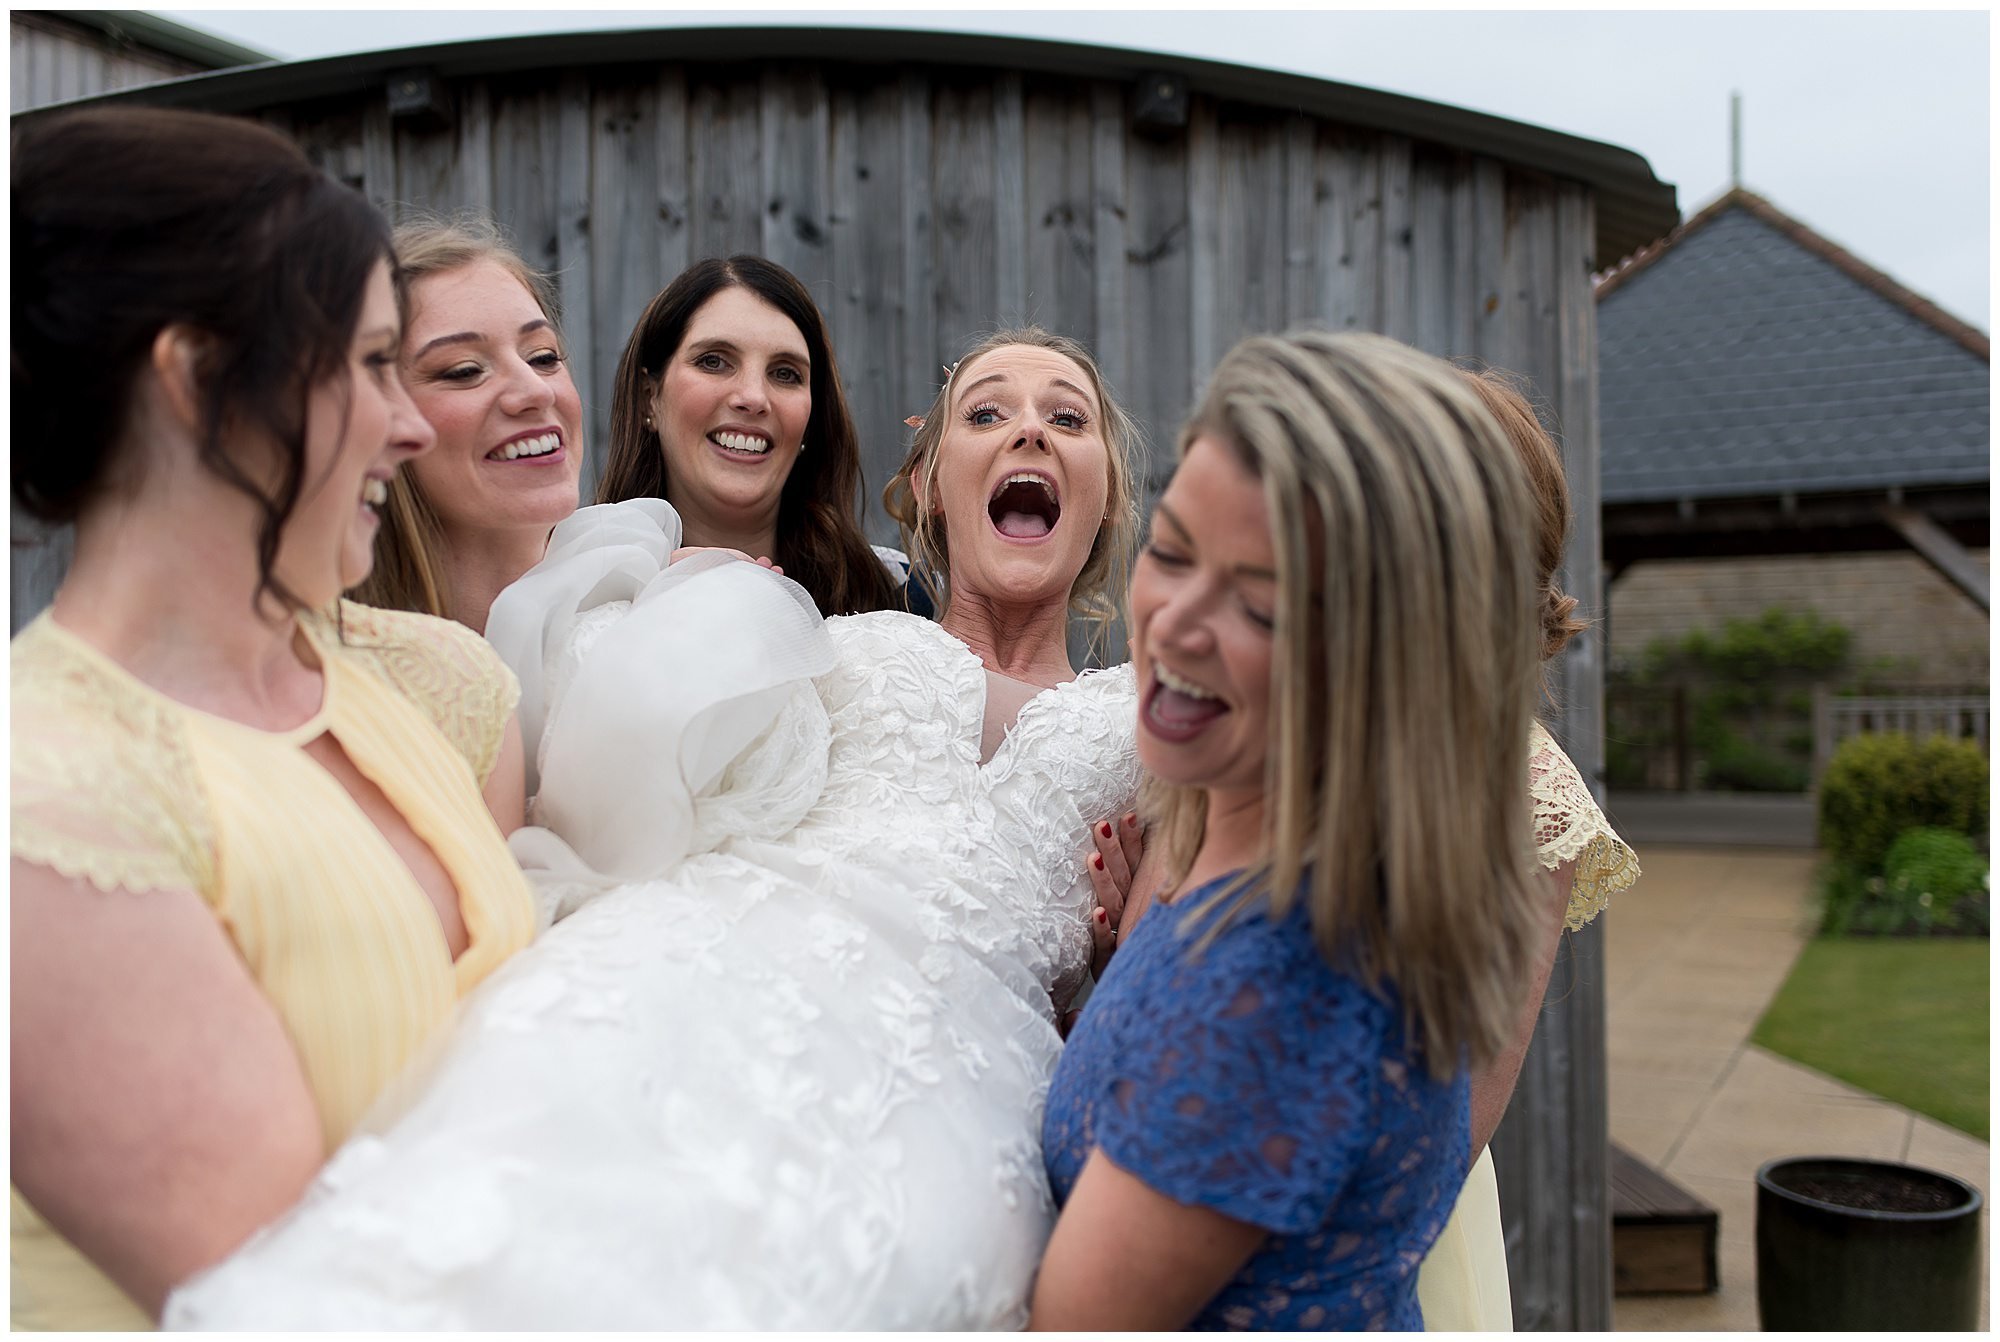 &quot;Let's pick her up!&quot; When your friends are really there for you on your wedding day! What antics do you think your friends will get up to on your wedding day??

 #walledgardeninfife #walledgardeninfifewedding #fifewedding #dunfermlineweddin